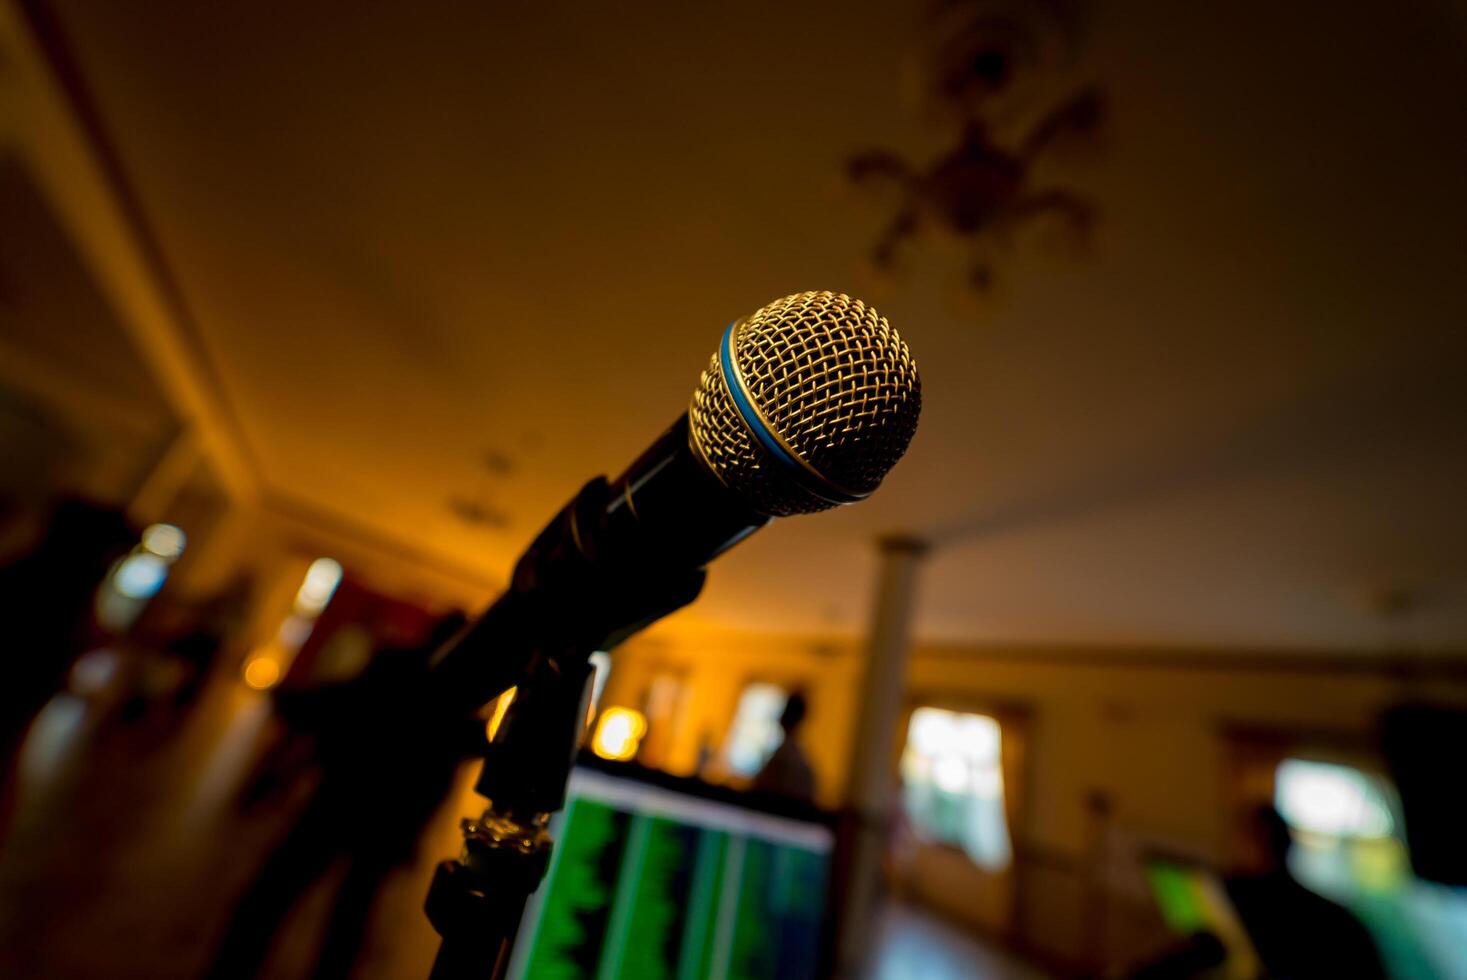 Microphone on the blurred background. Close-up microphone in the concert hall blur background. Musical concept photo